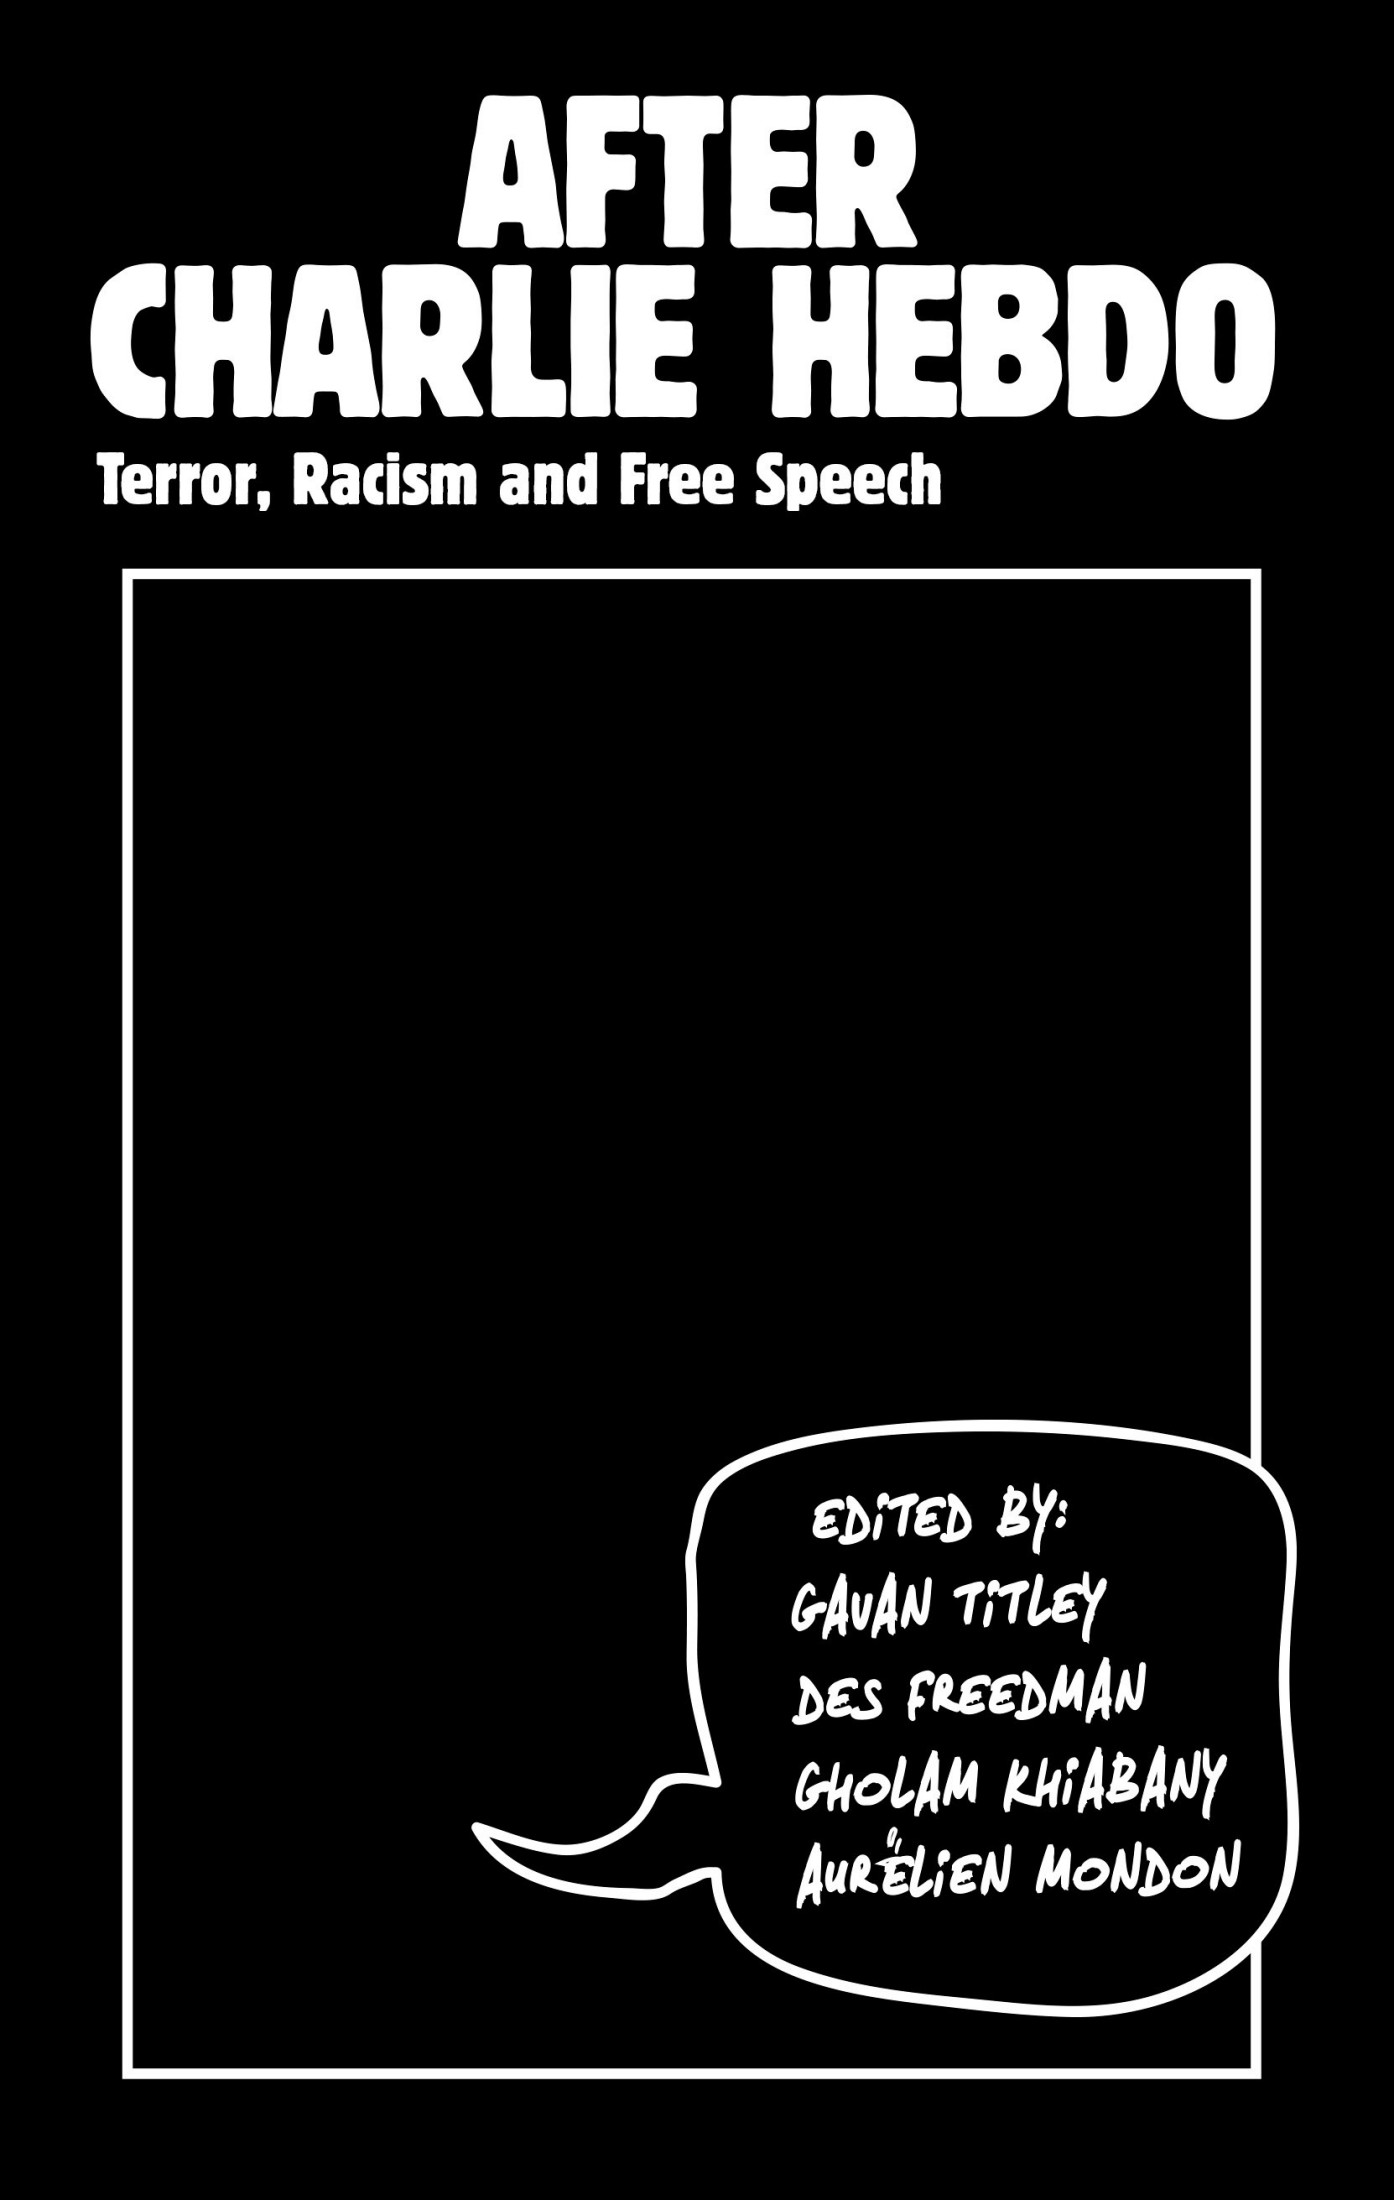 After Charlie Hebdo: Terror, Racism and Free Speech